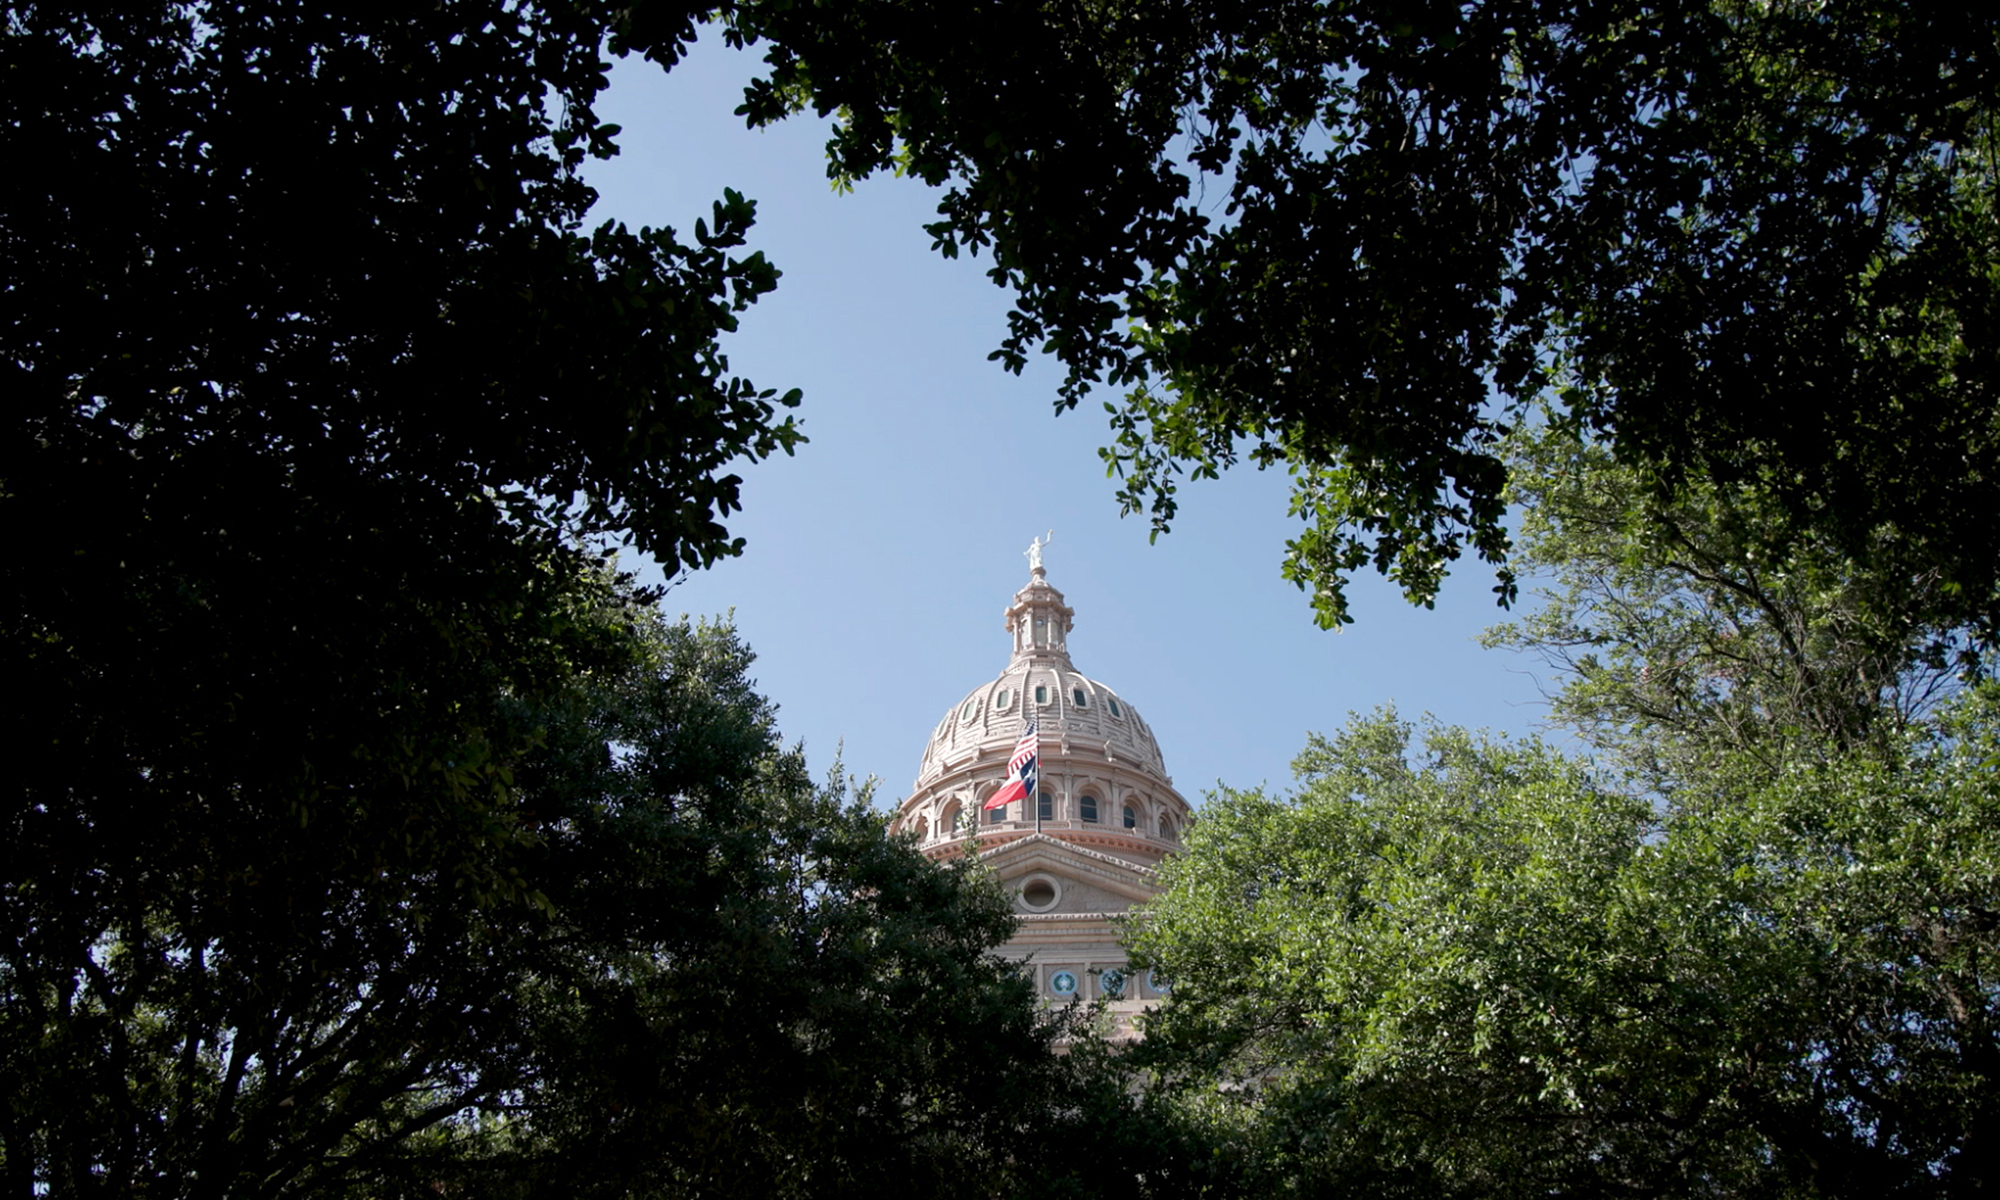 Anti-abortion advocates point to Texas as a leader of exploratory abortion legislation that could serve as prototypes for other states. (Photo by Joseph Kual Zakaria/News21)